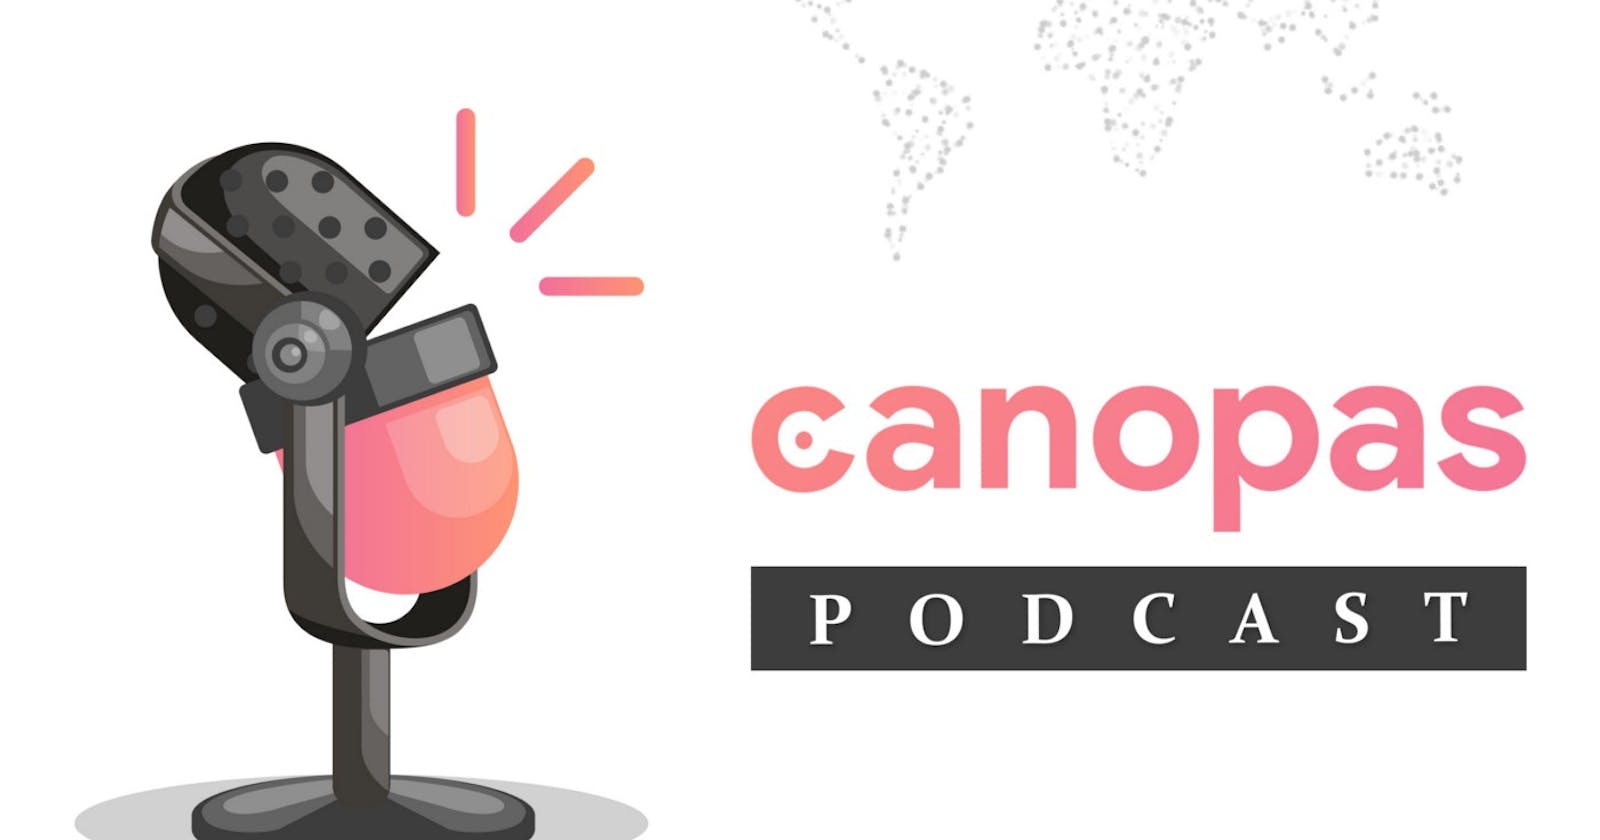 Canopas Podcast 6— How to get started as a web developer